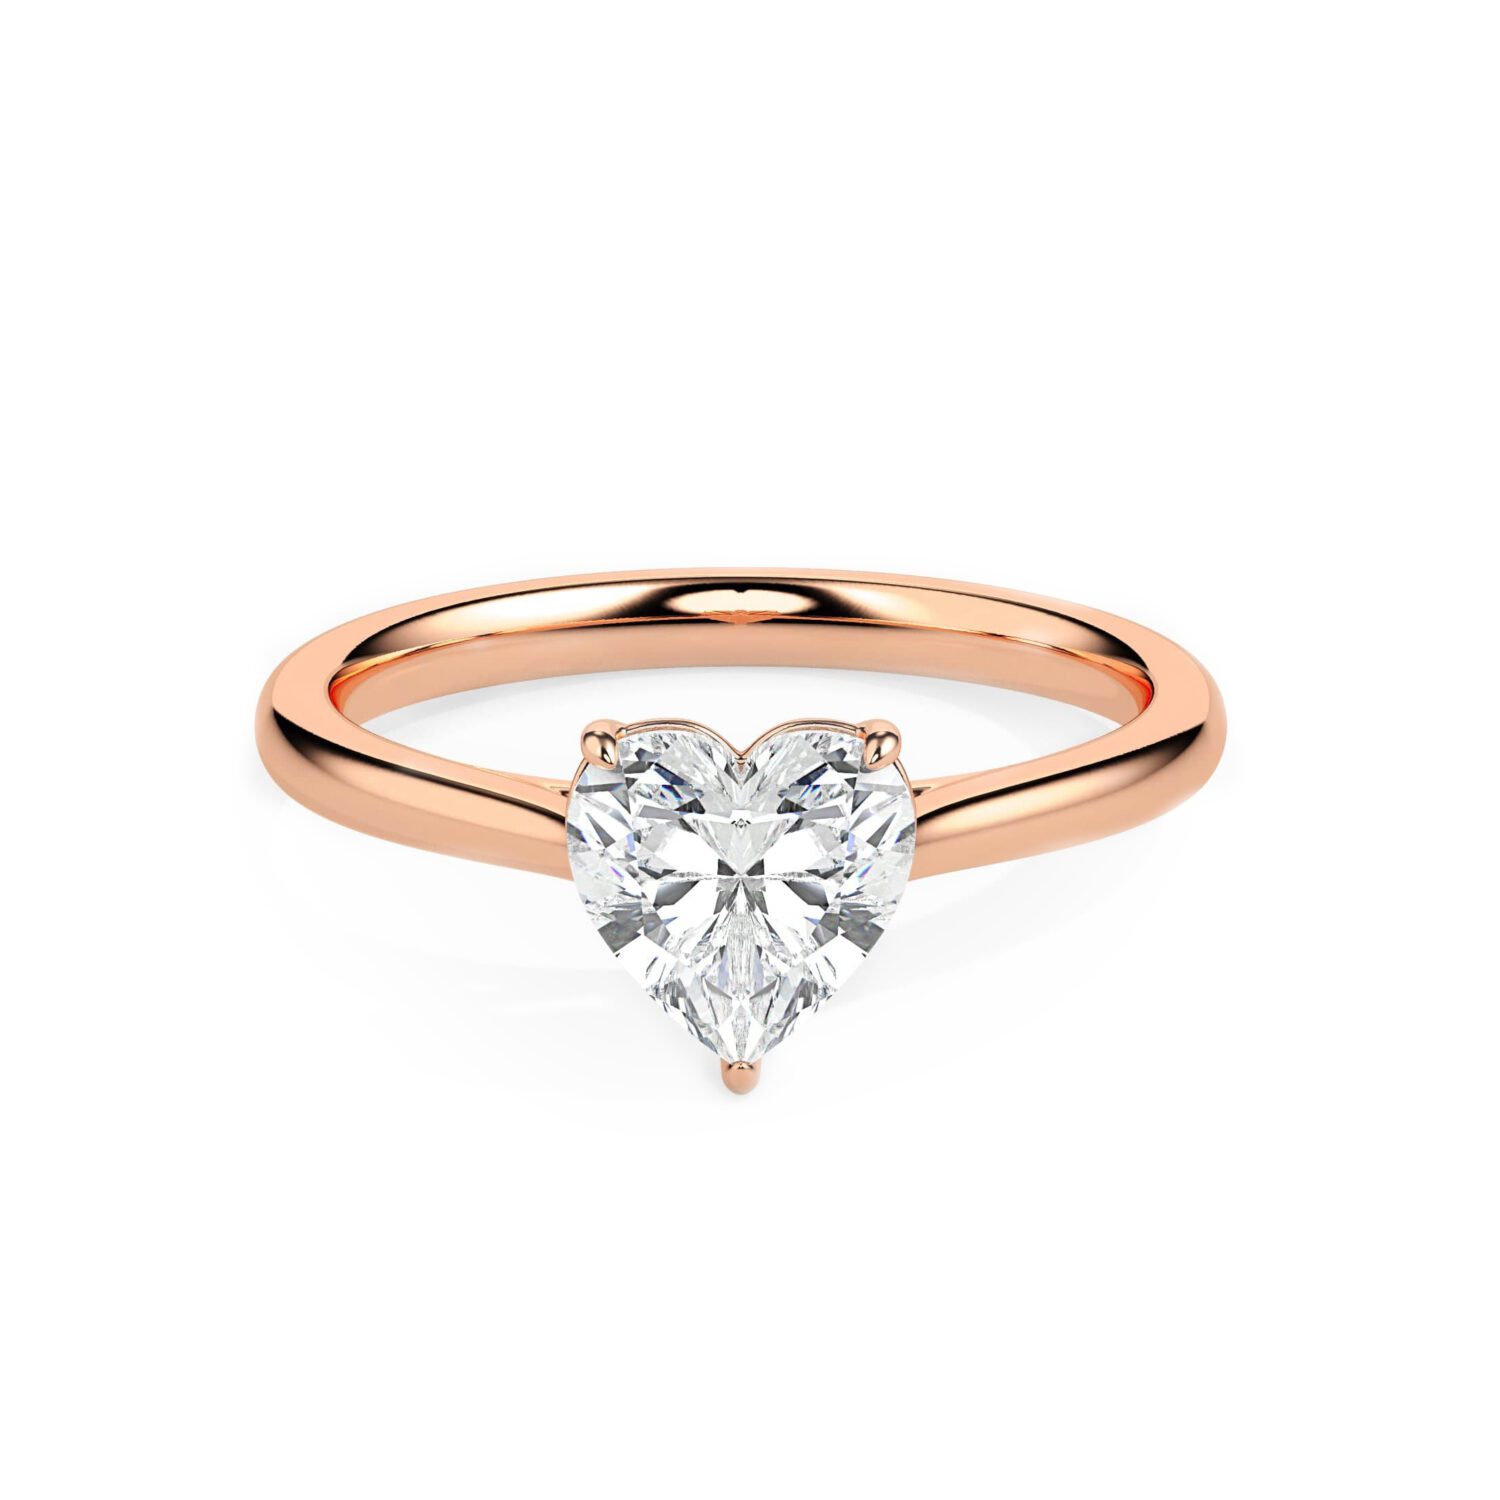 Lab grown diamonds in Cyprus - The Heart 0.5 to 5ct Diamond Solitaire Engagement Ring best quality and price